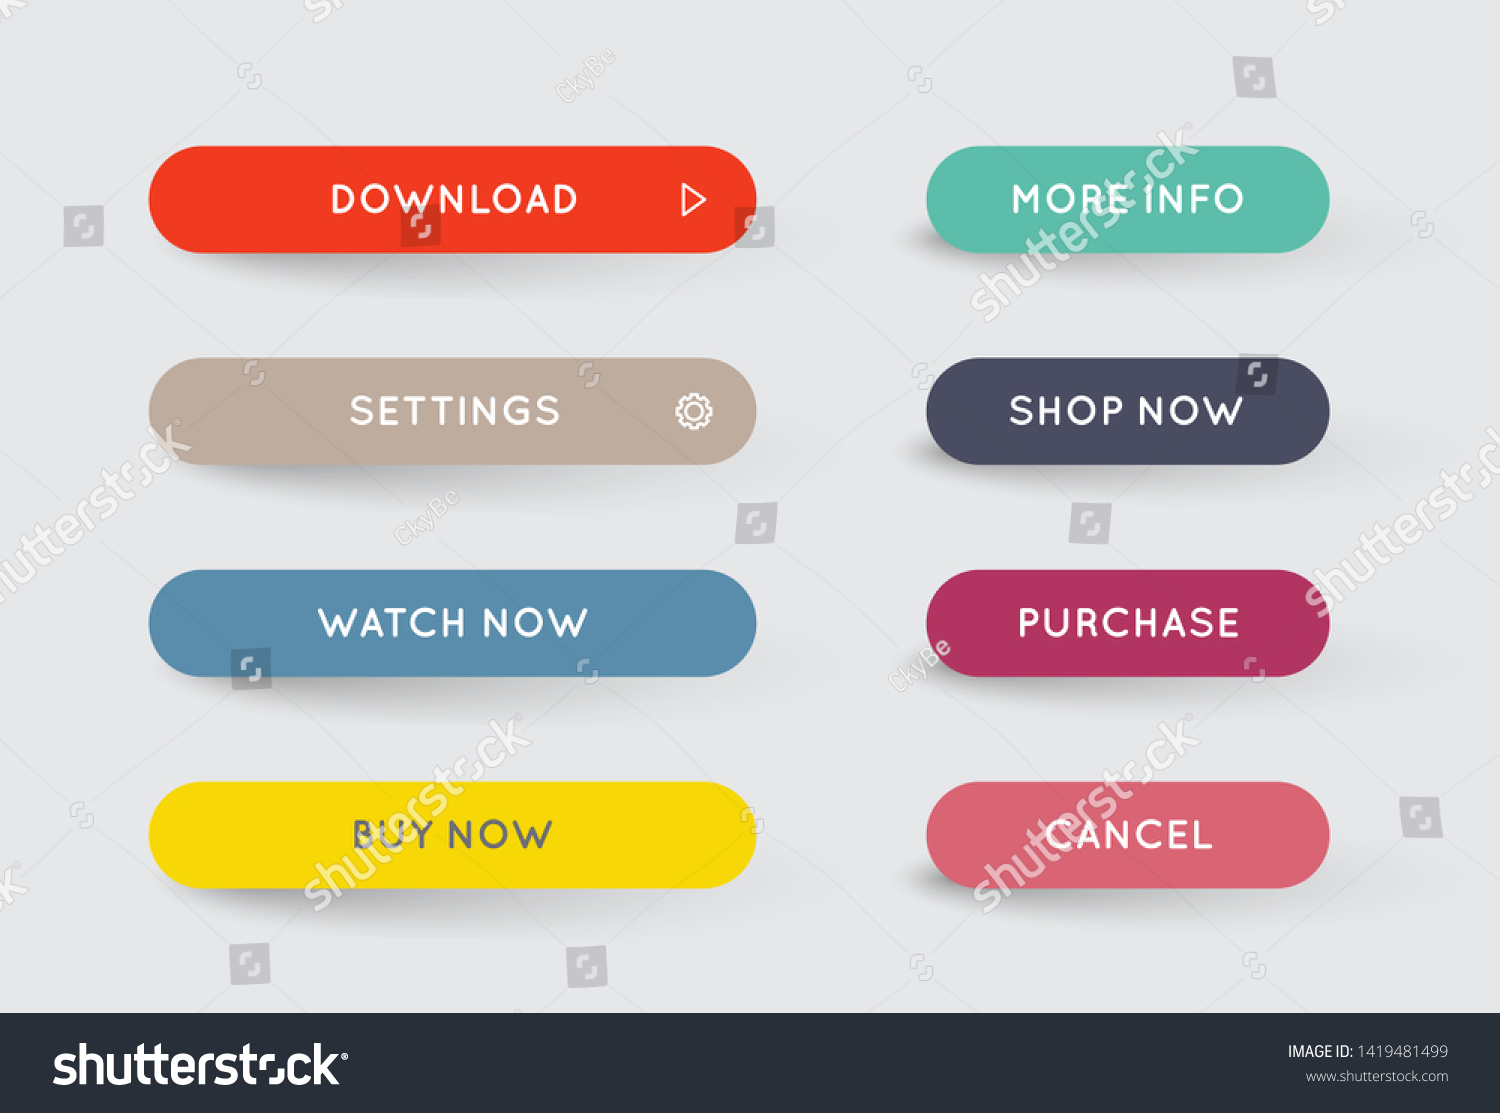 Set of Vector Modern Gradient App or Game Buttons. Trendy gradient colors with shadows.  #1419481499